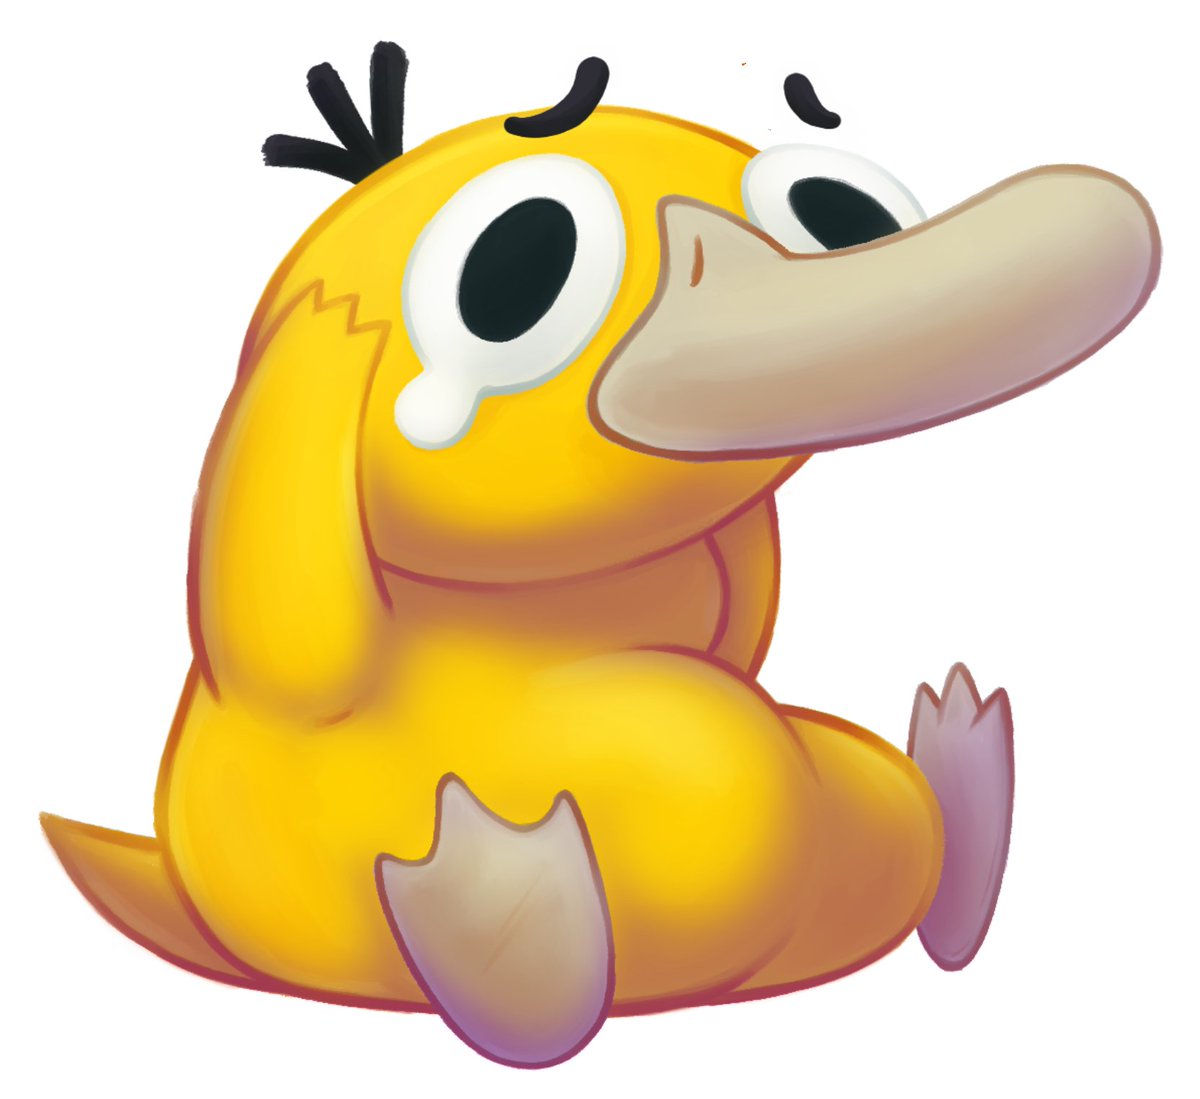 Just a silly lil guy ❤️

#pokemon #psyduck #Clipstudiopaint